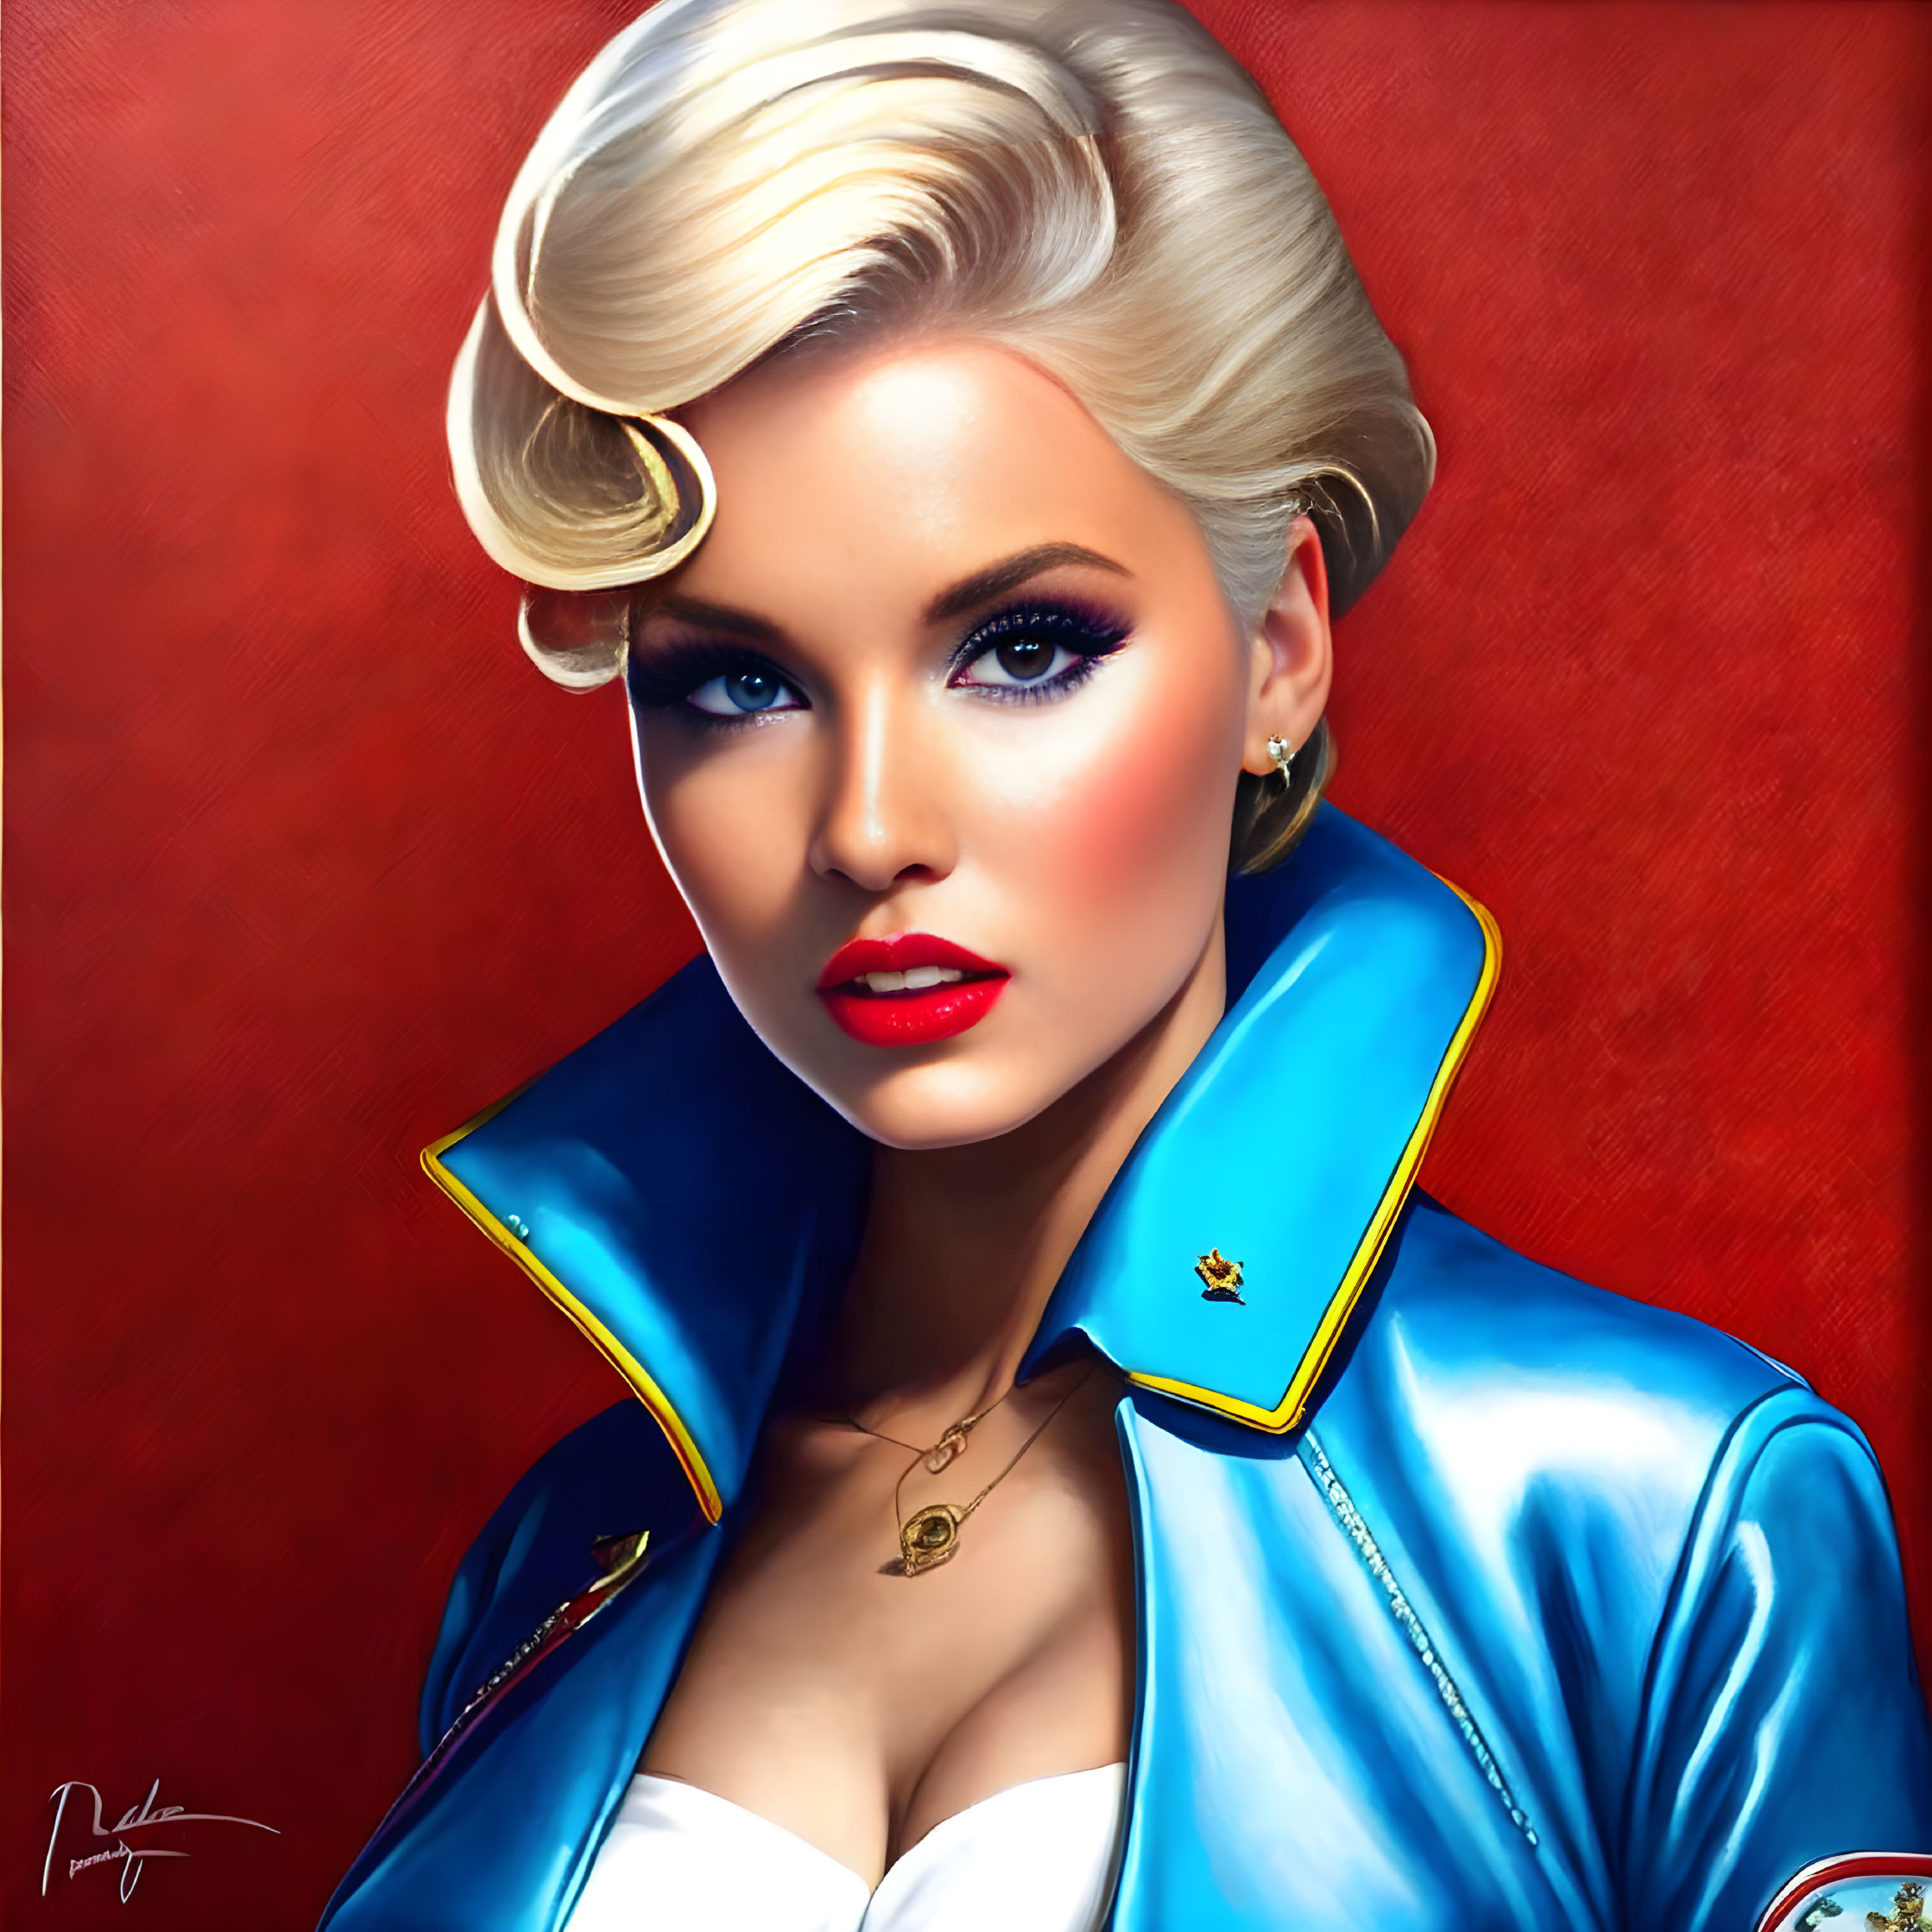 Vibrant illustration: Woman with platinum blonde hair, bold makeup, blue collared jacket, and